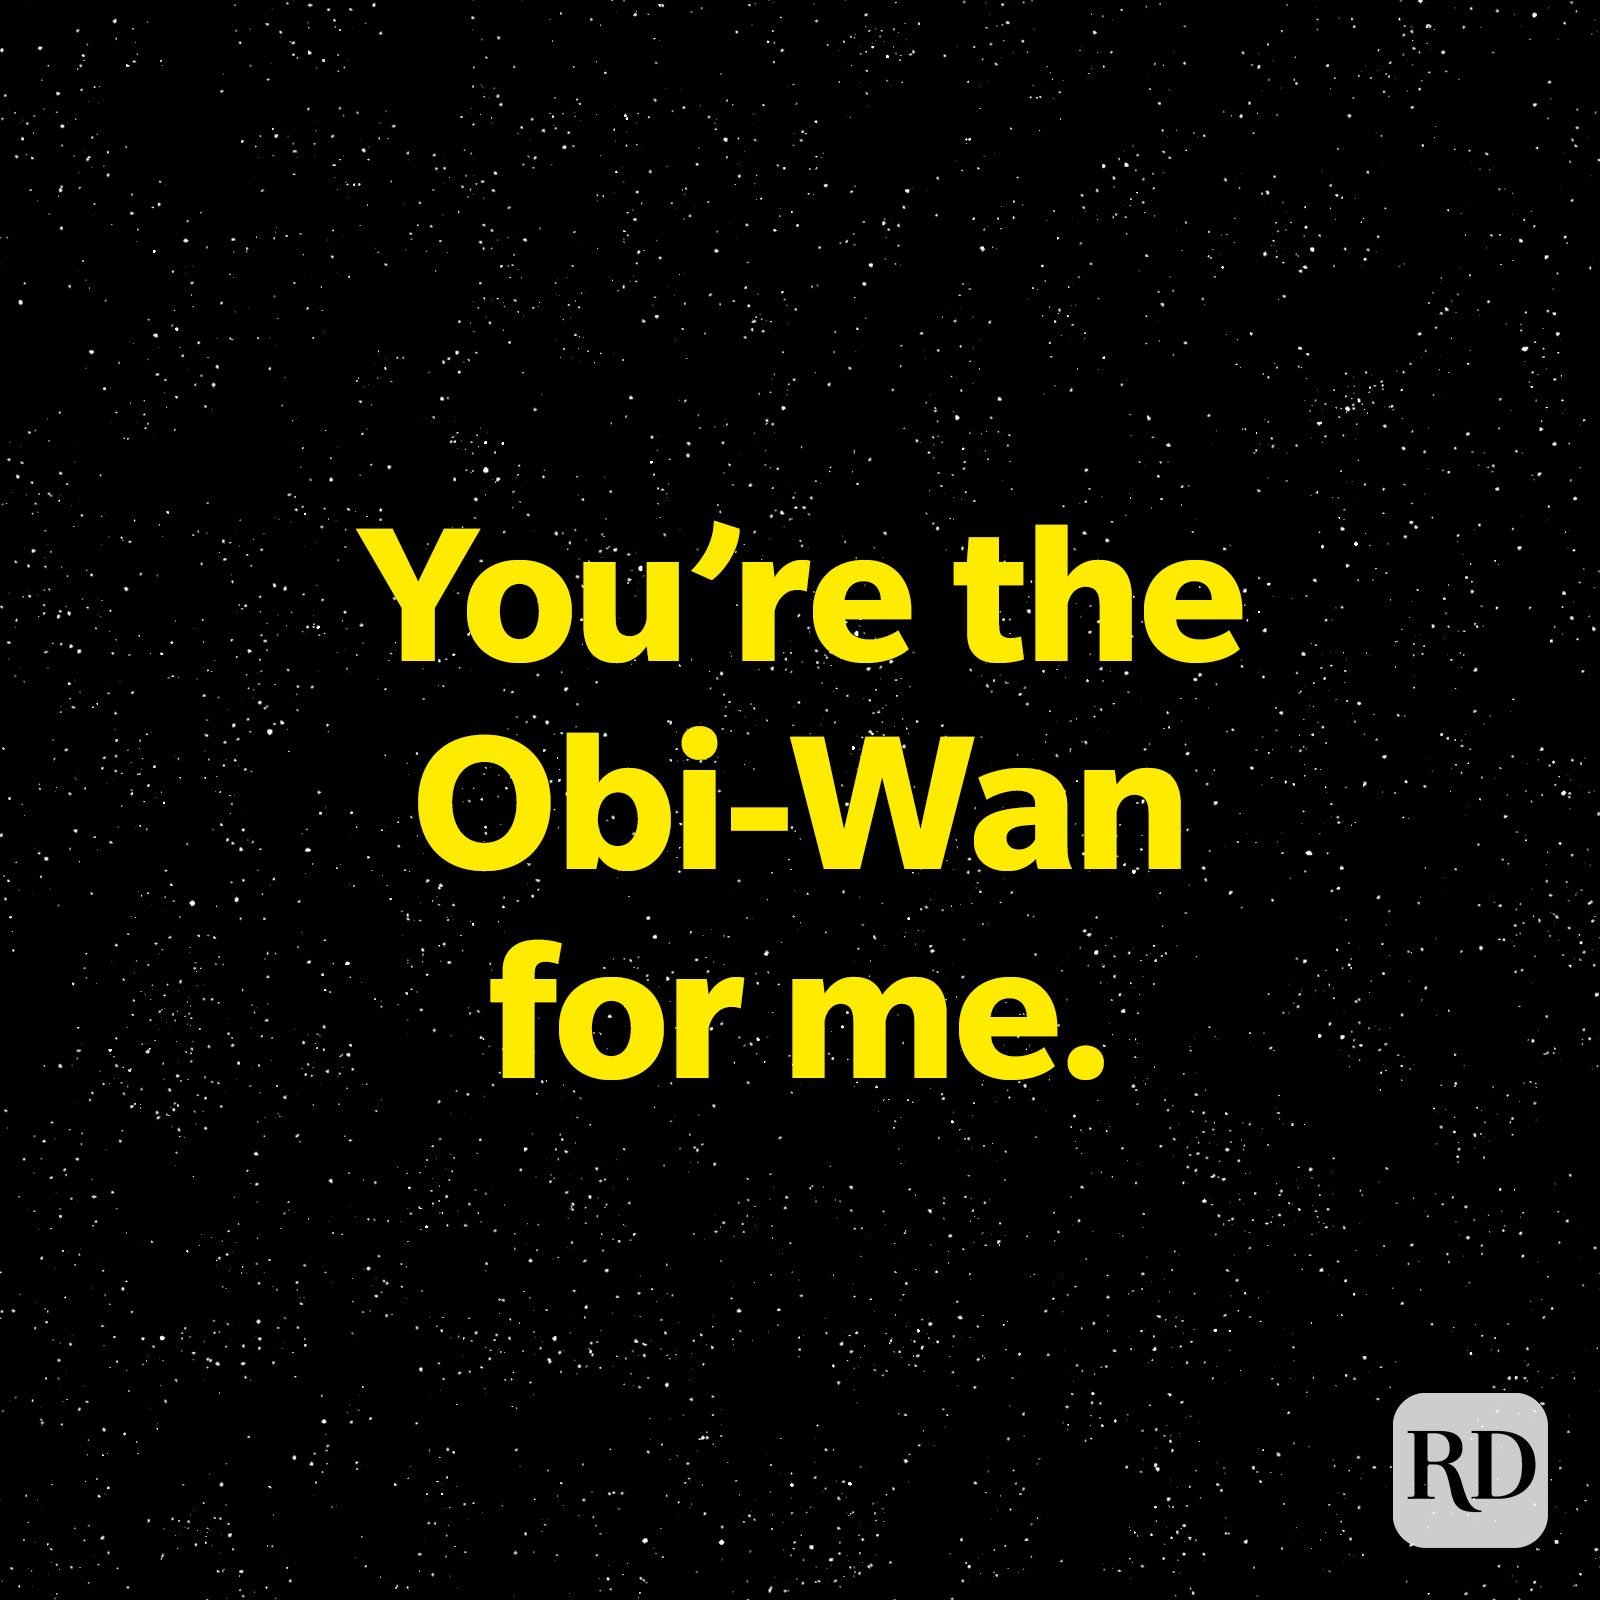 40 Star Wars Pick Up Lines That Just R2 Endor-able